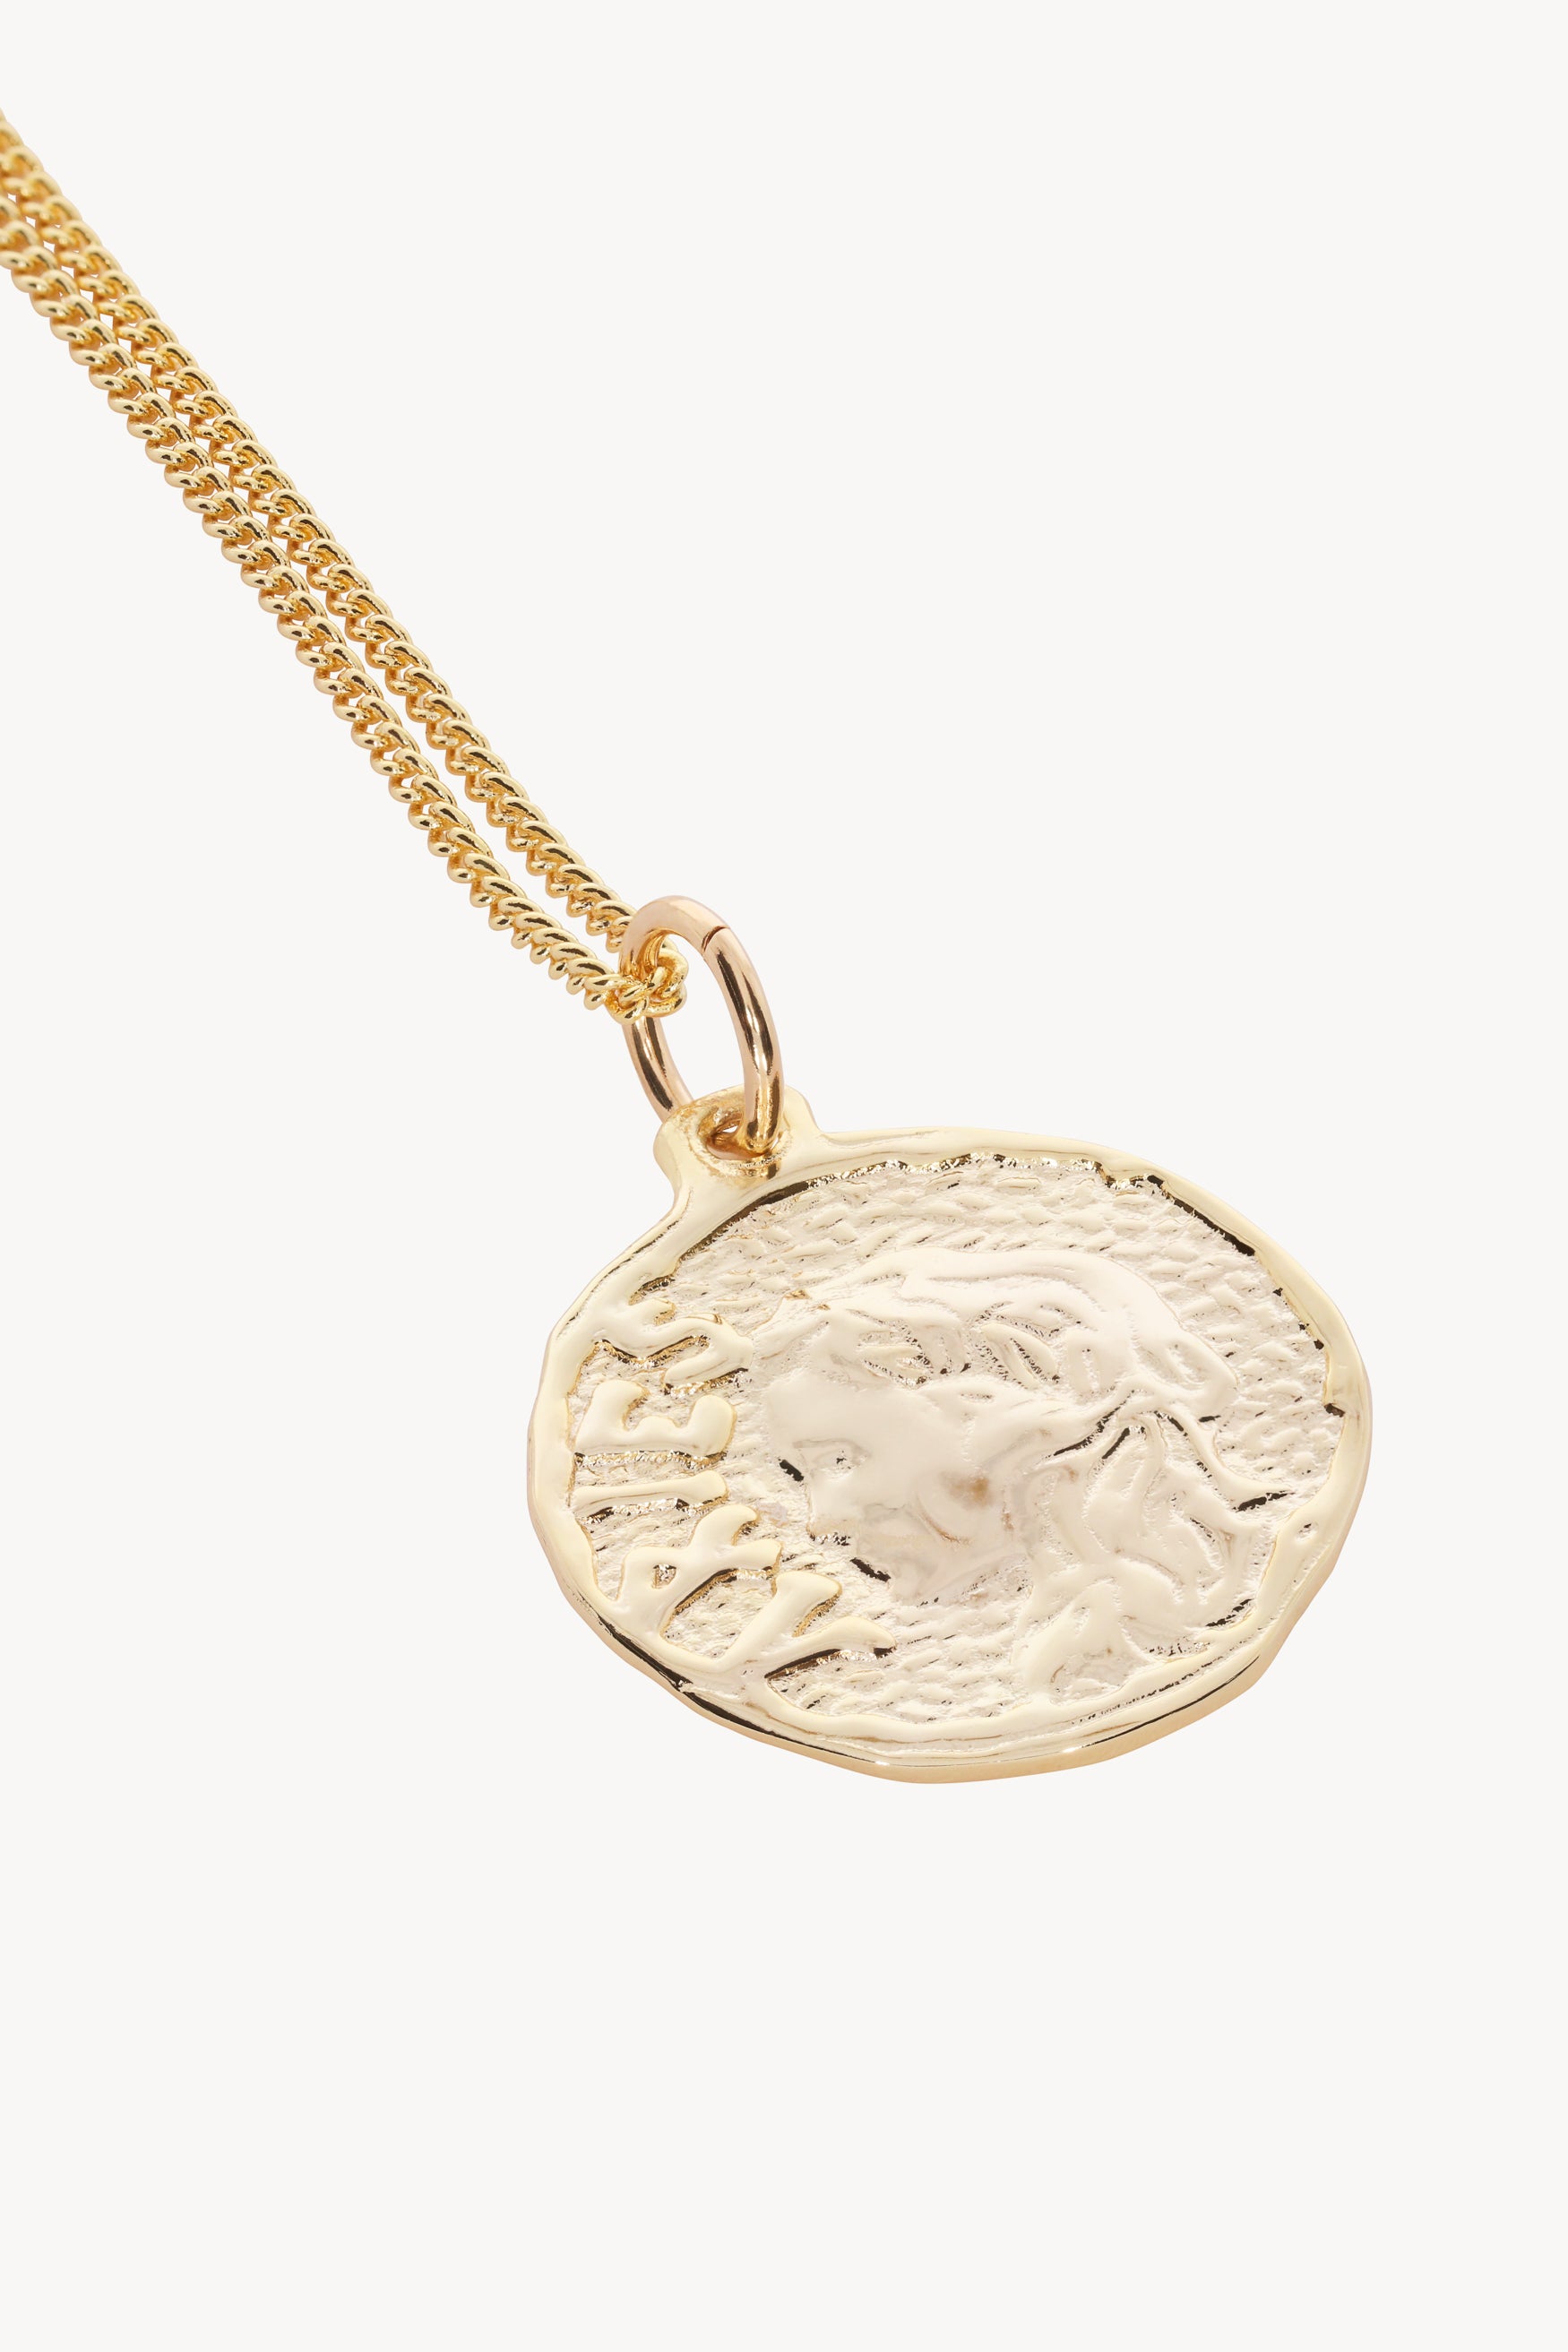 Solid Gold Necklace, Antique Coin Pendant Necklace, 14k Gold Necklace, Gold Coin  Necklace, Roman Coin Necklace, 9k Coin Necklace 